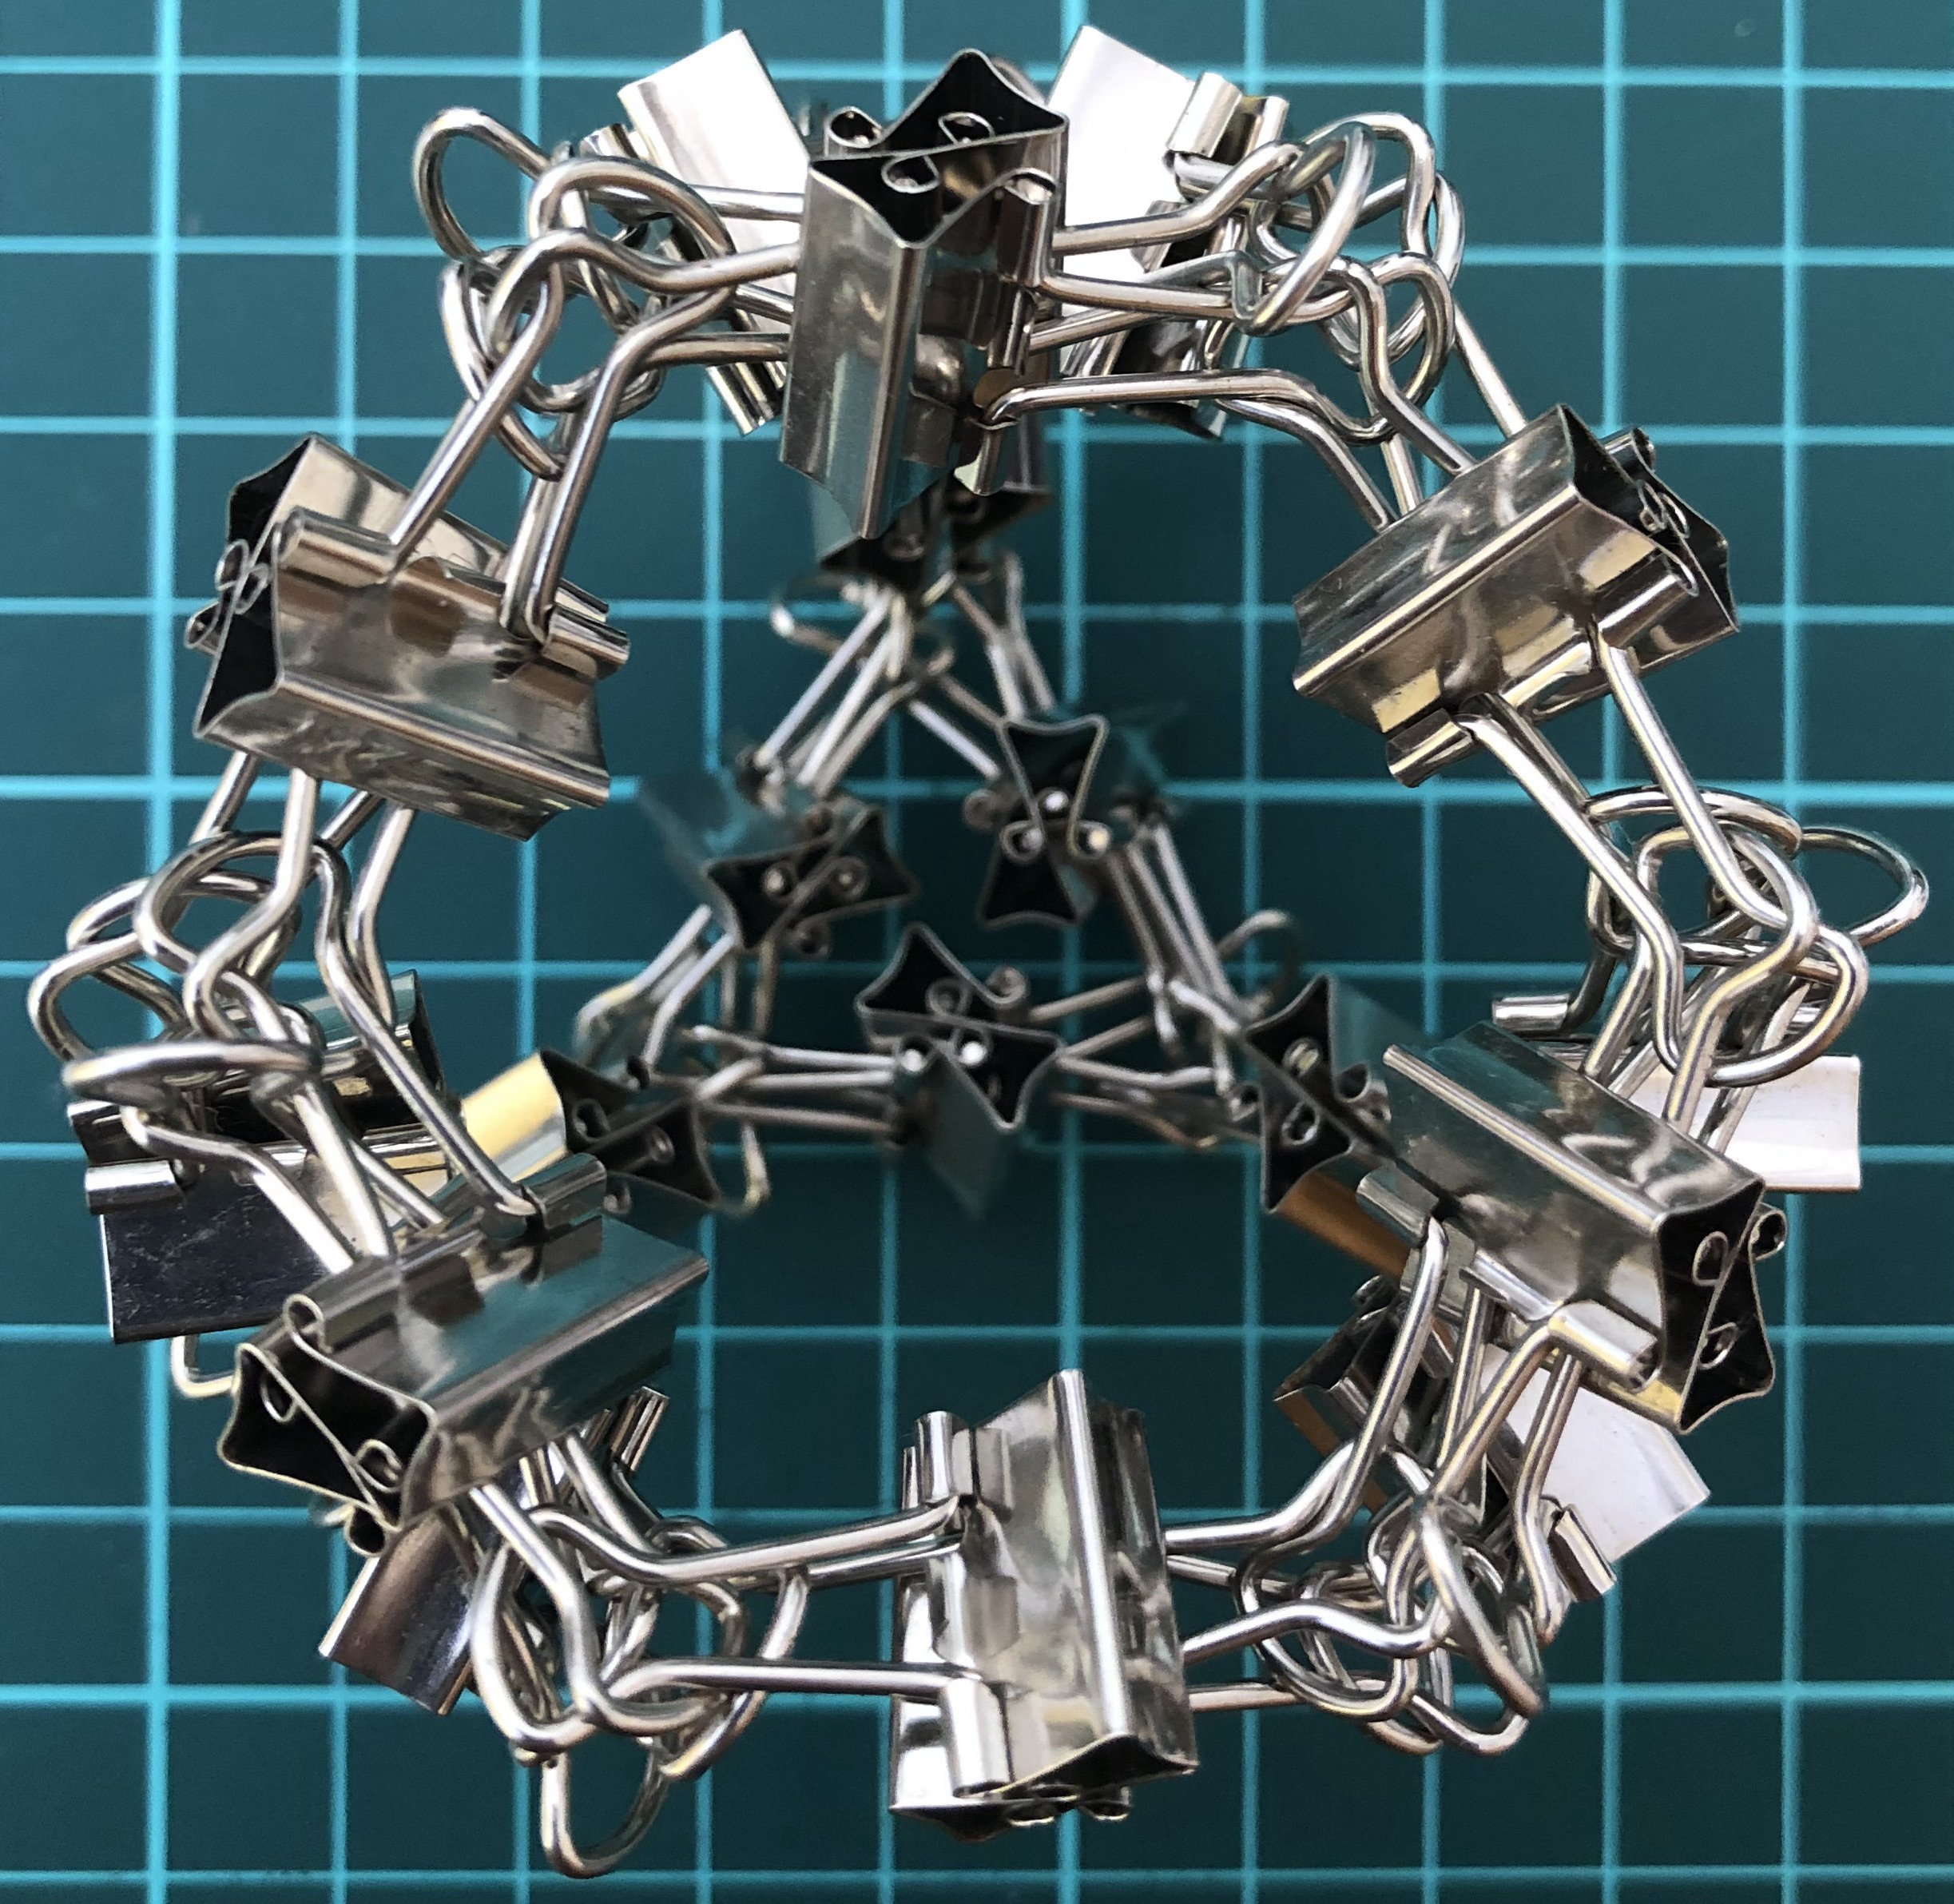 36 clips forming 18 I-edges forming truncated tetrahedron